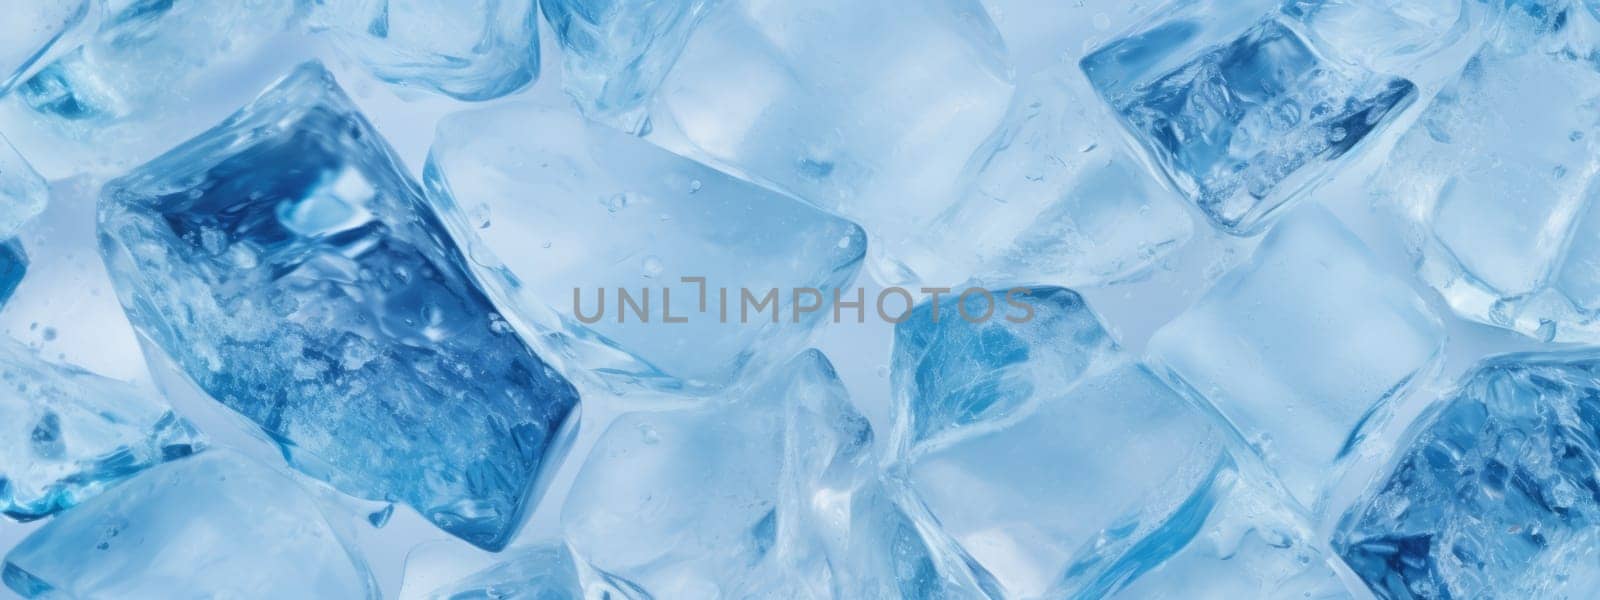 Crystal clear ice cubes seamless pattern texture background. by Artsiom